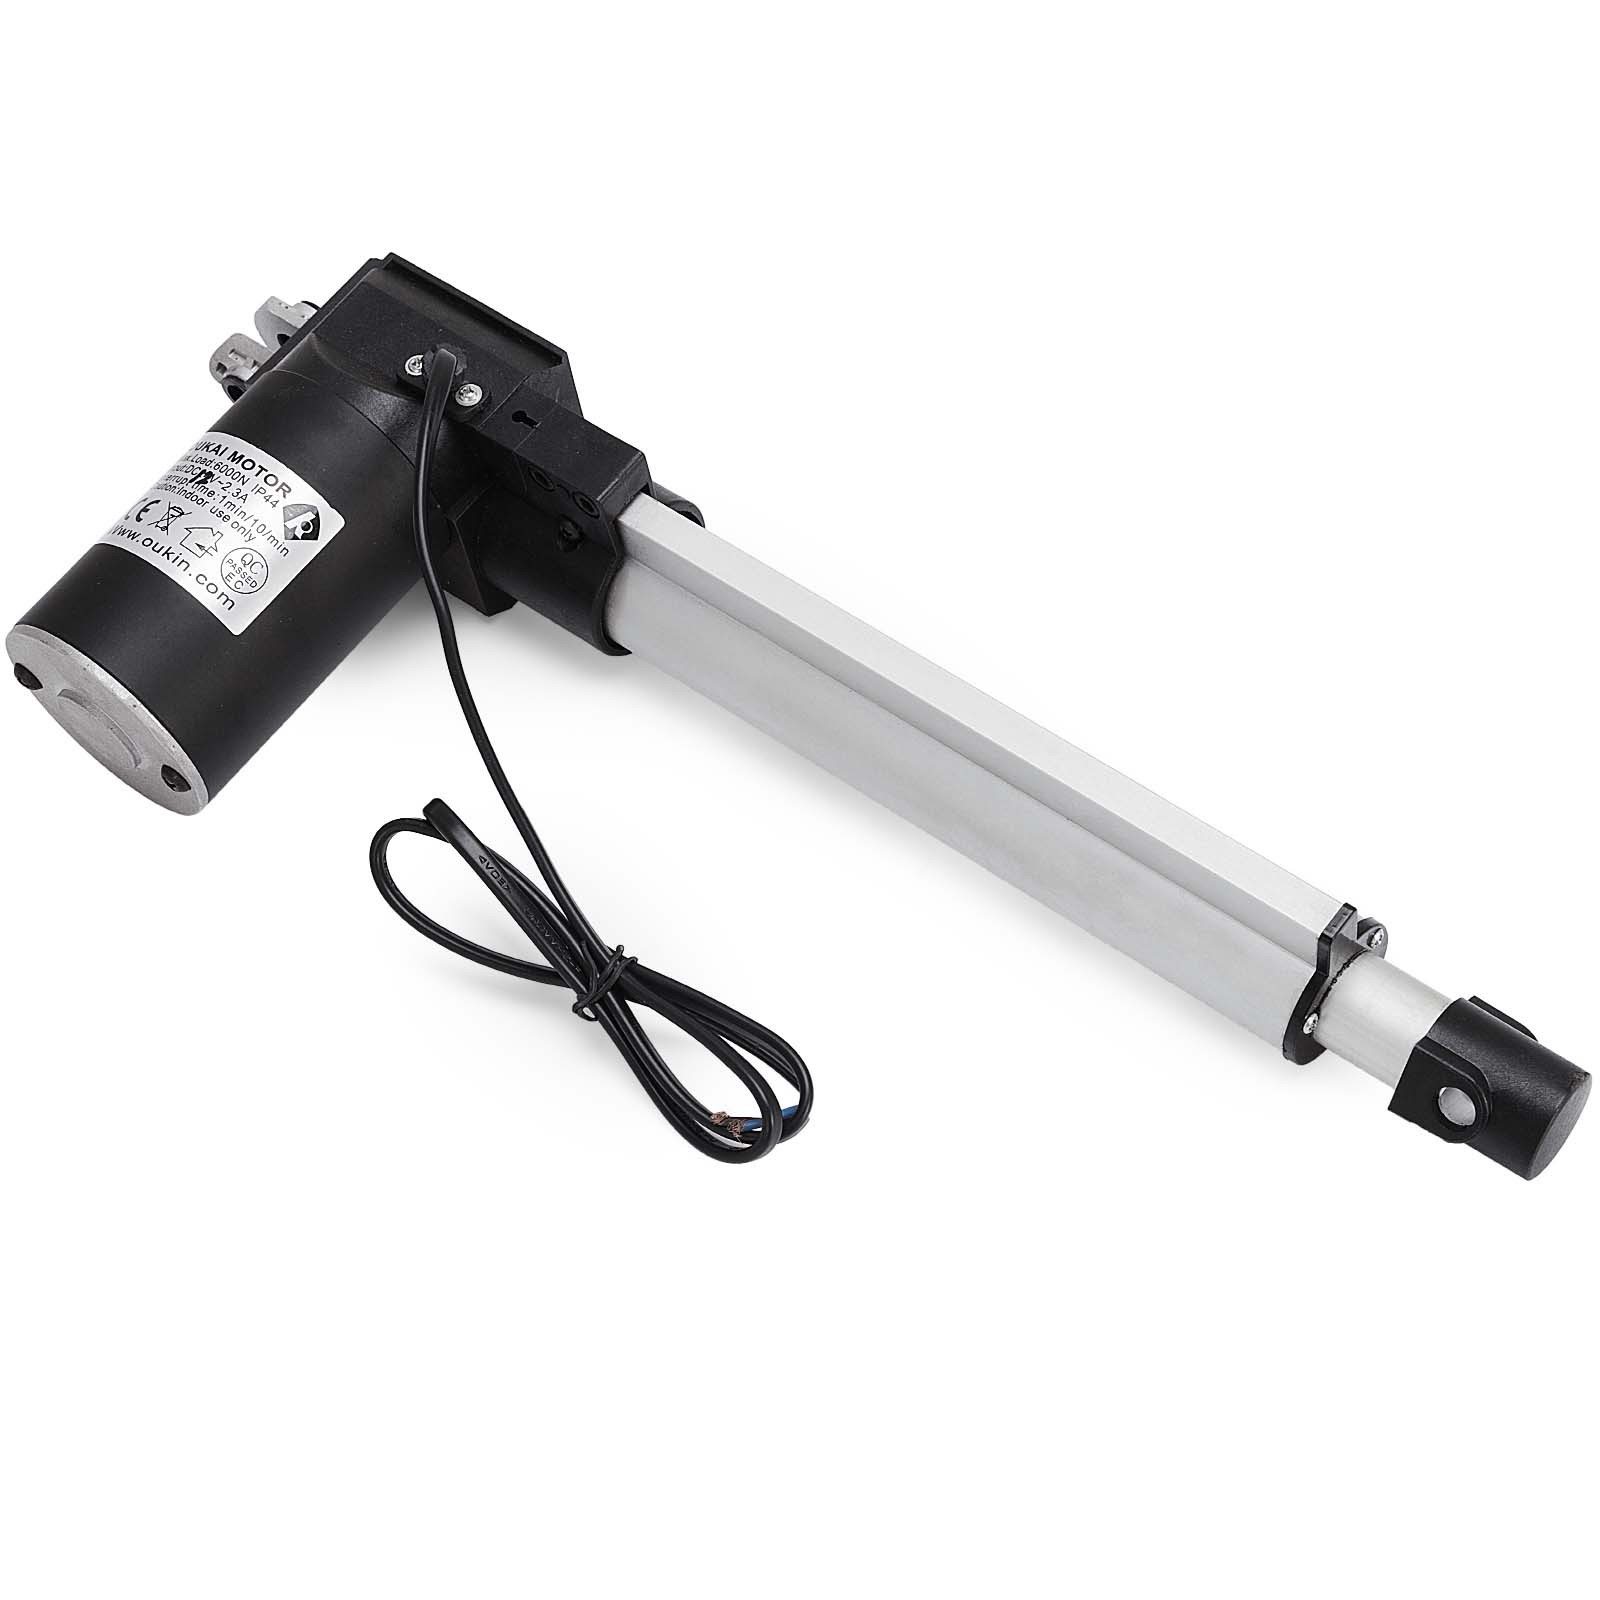 12" 6000N Electric Linear Actuator 1320 Pound Max Lift Heavy Duty 12V DC Motor 